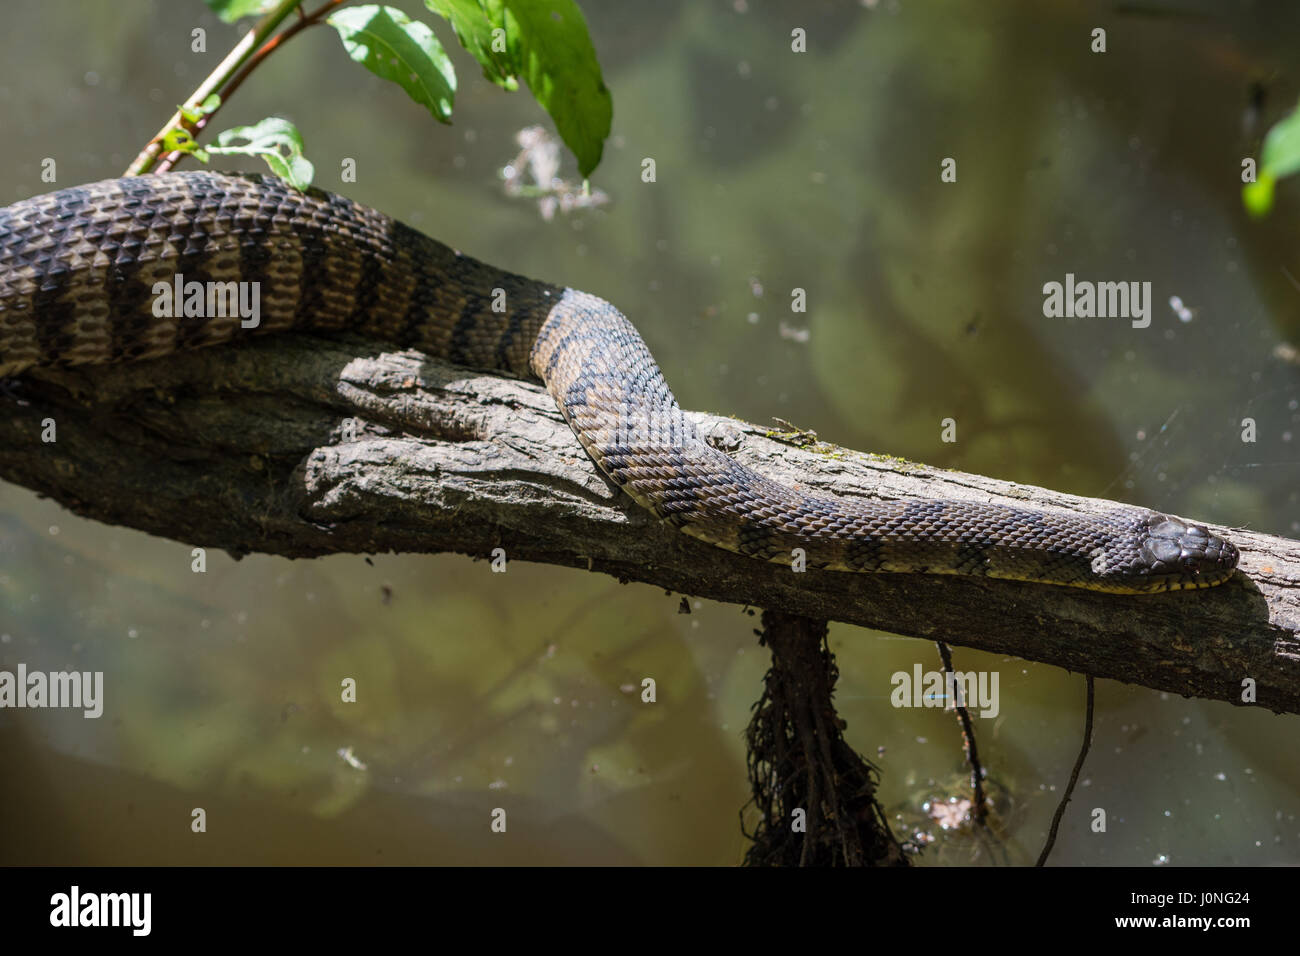 A large Diamond-backed Water Snake (Nerodia rhombifer) resting on a tree trunk by a pond after a meal. Houston, Texas, USA. Stock Photo